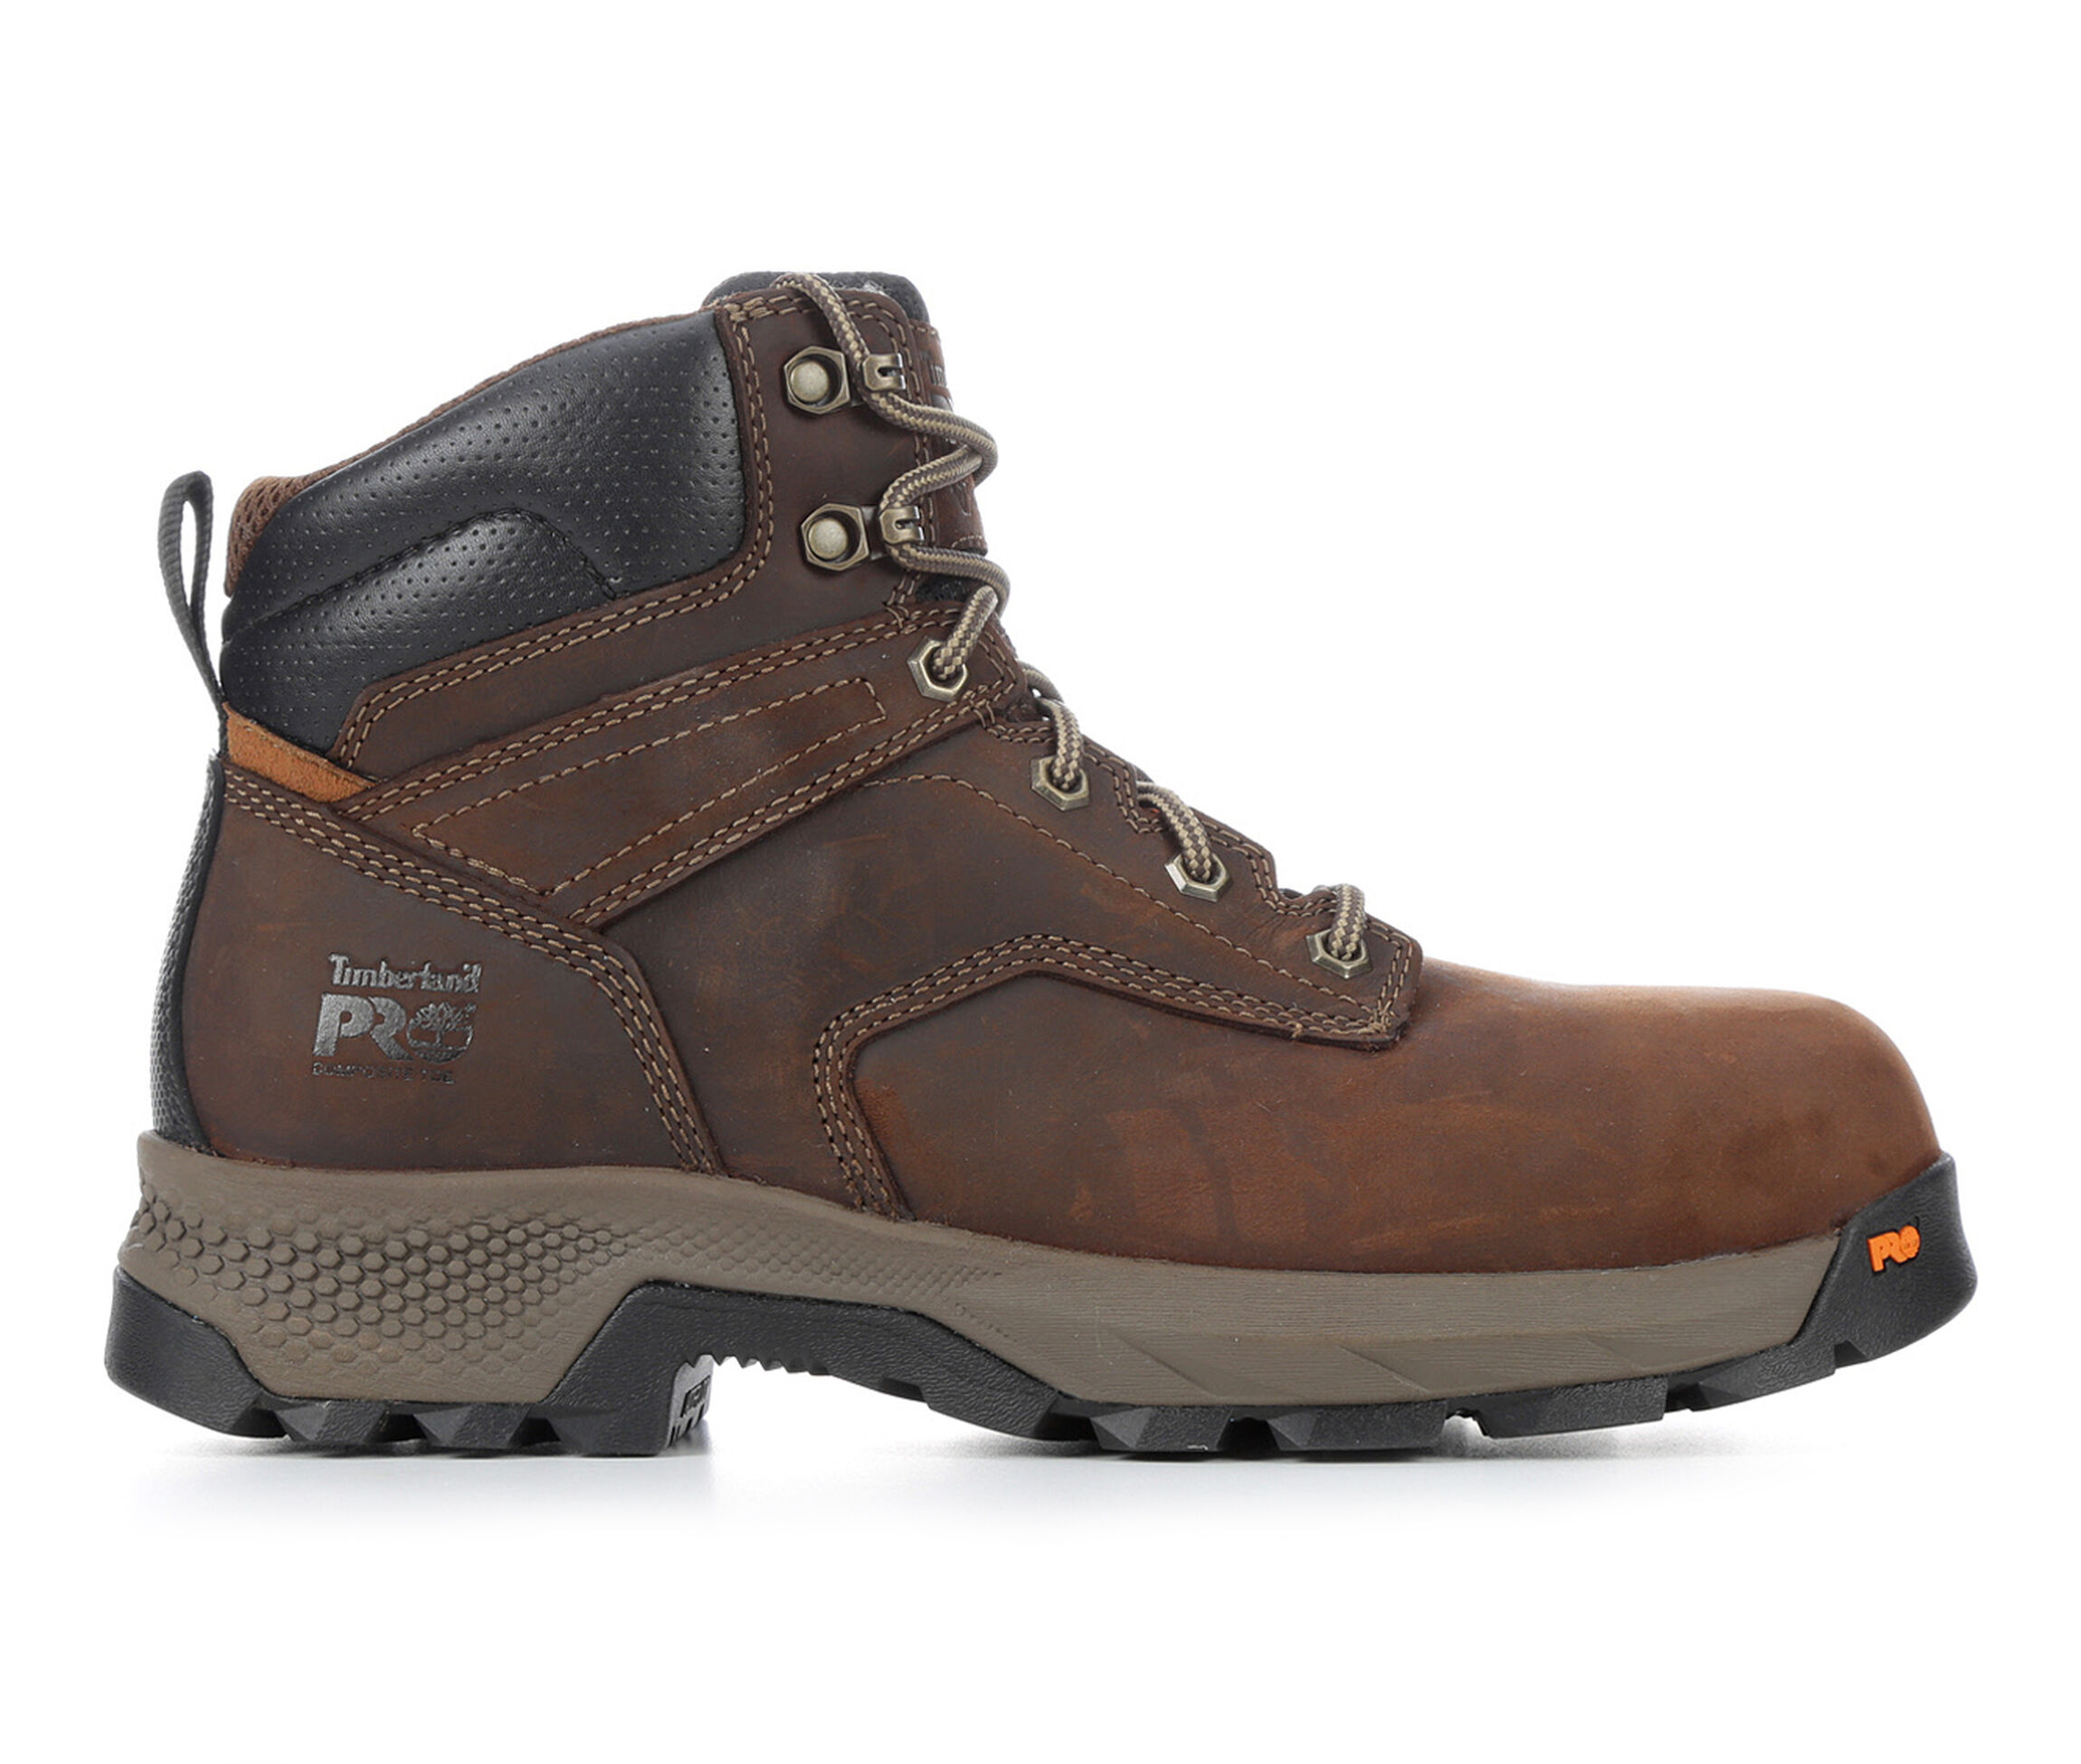 Timberland PRO Work Boots and Shoes | Shoe Carnival